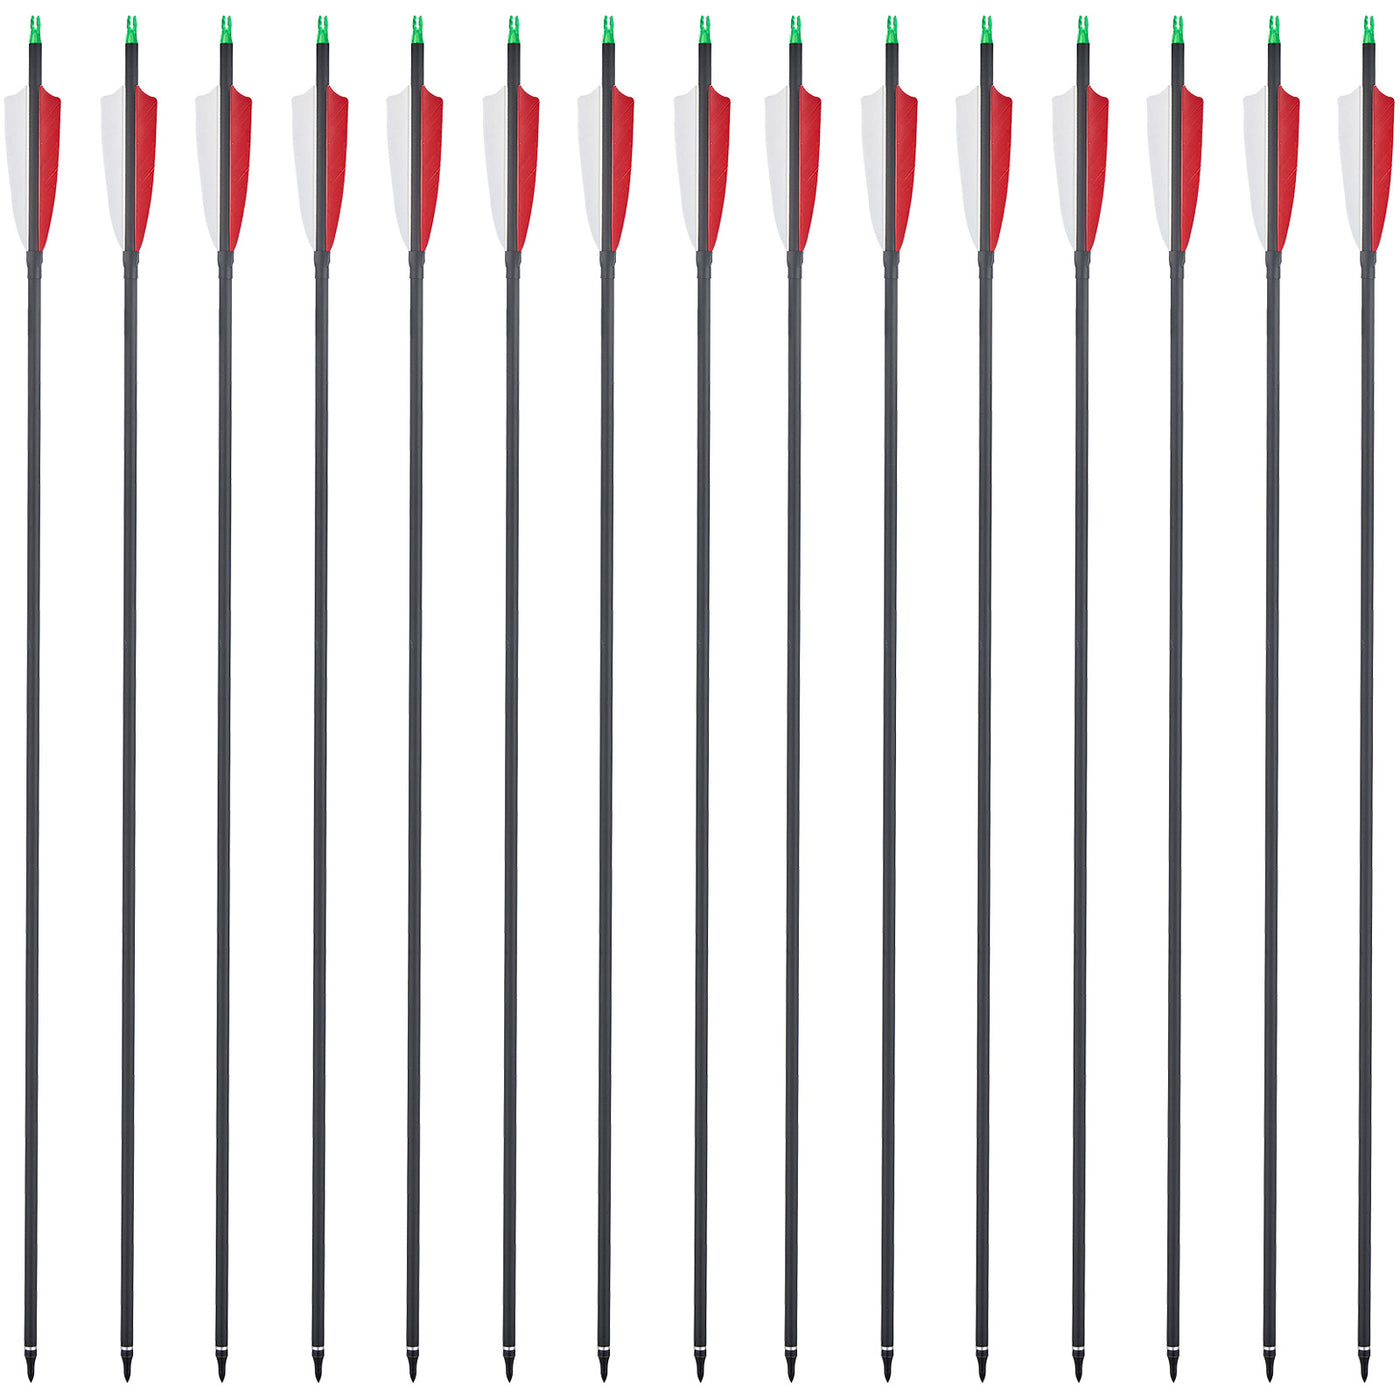 12x 31" OD 7.8mm ID 6.2mm Spine 500 Archery Arrows 4" Shield Turkey Feather Mixed Carbon Red White Fletching